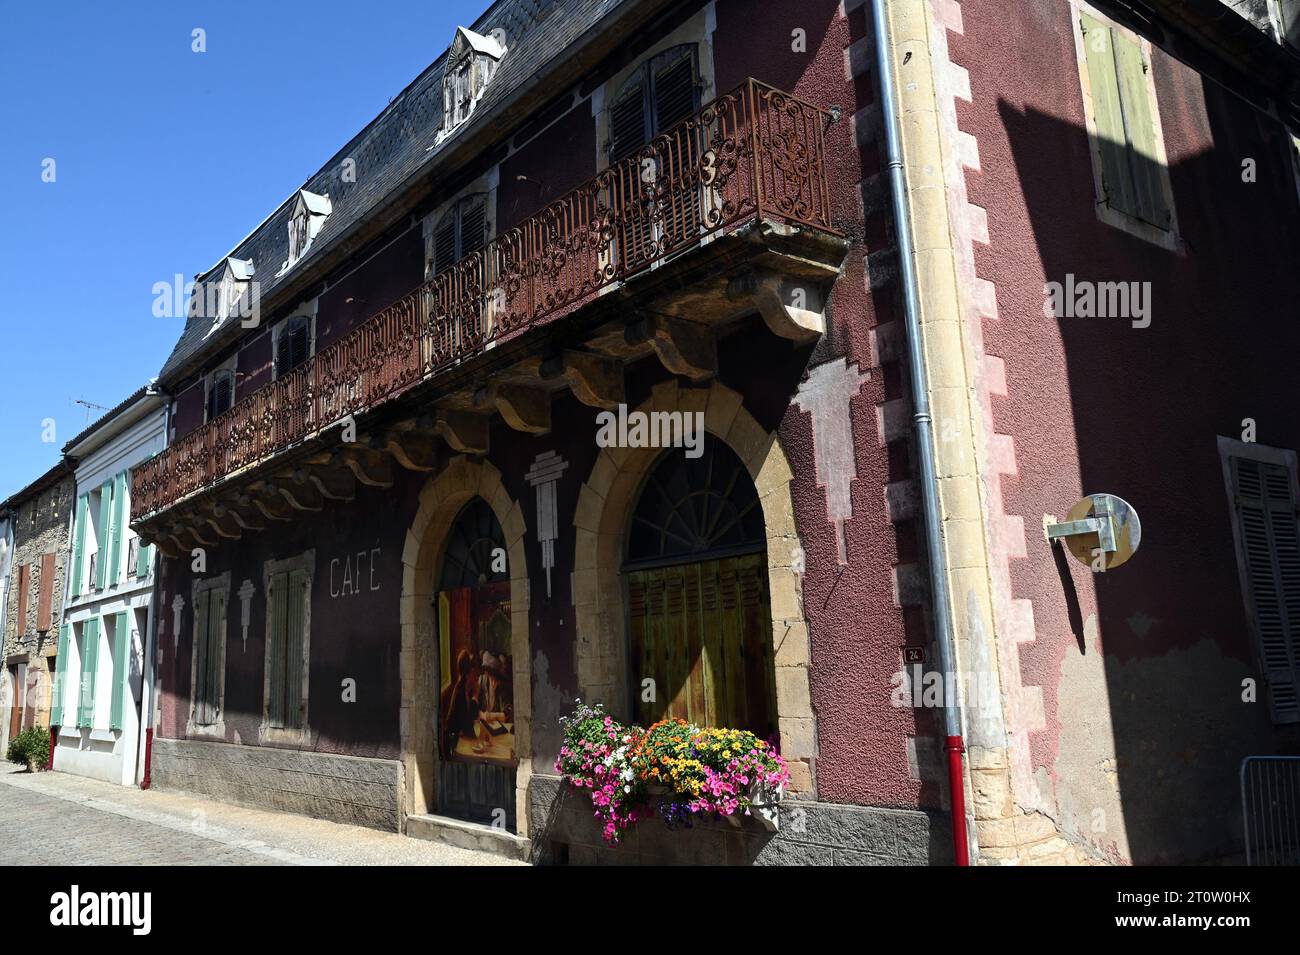 An abandoned building in a street in the town of Villefranche du     Perigord, Dordogne. A scene has been painted in a doorway to look like a cafe. Stock Photo